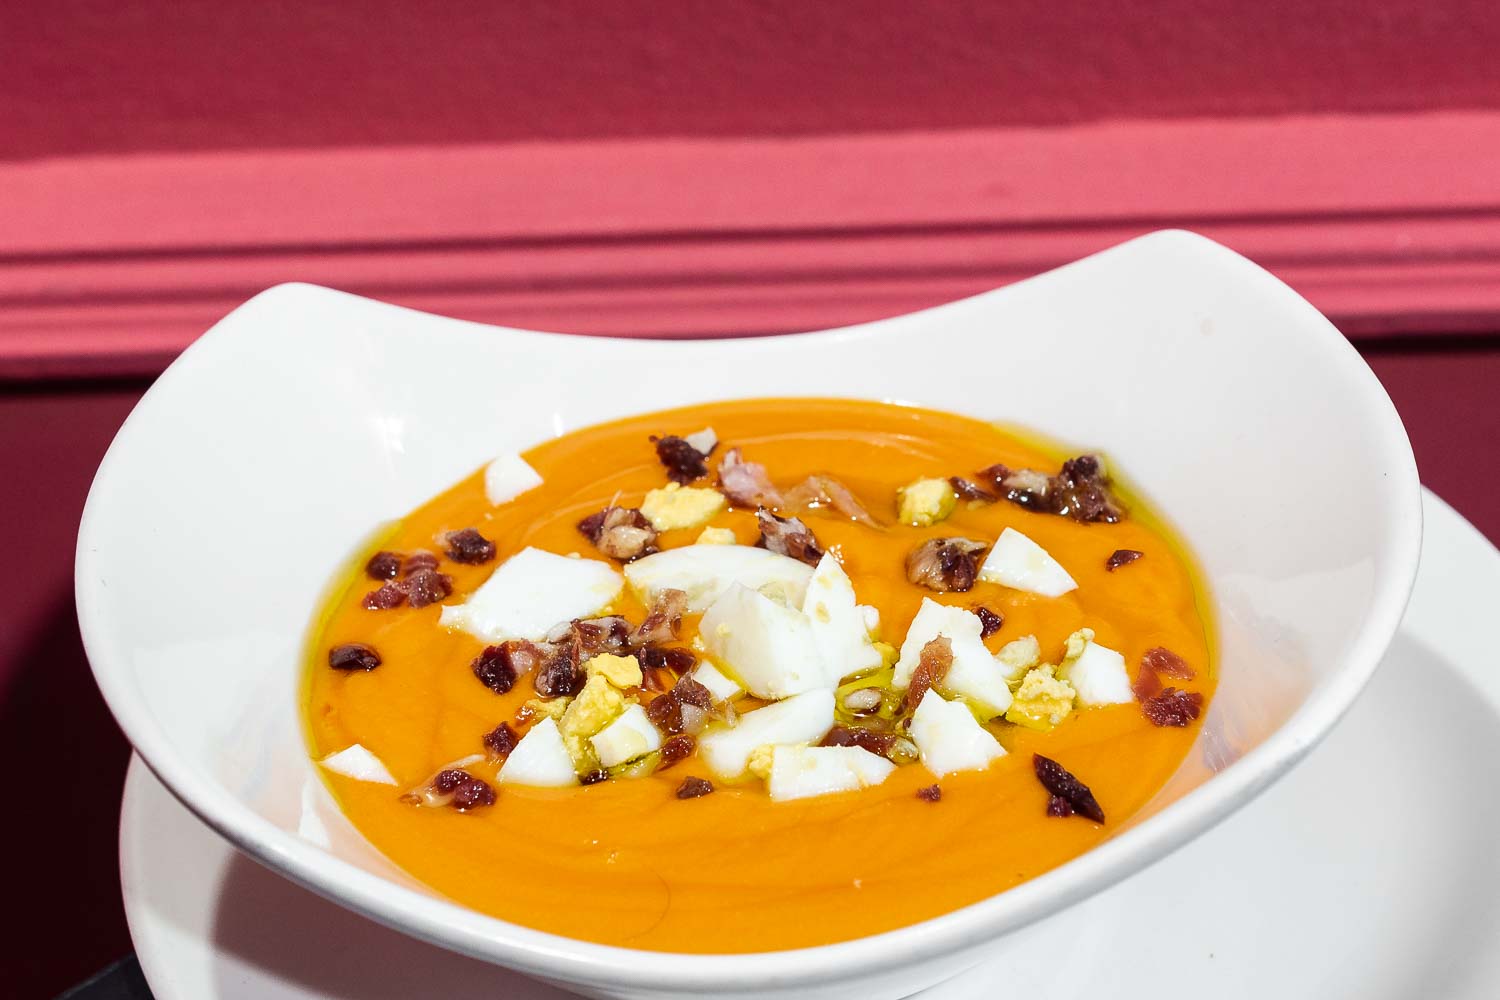 Cold tomato soup with iberian ham and egg